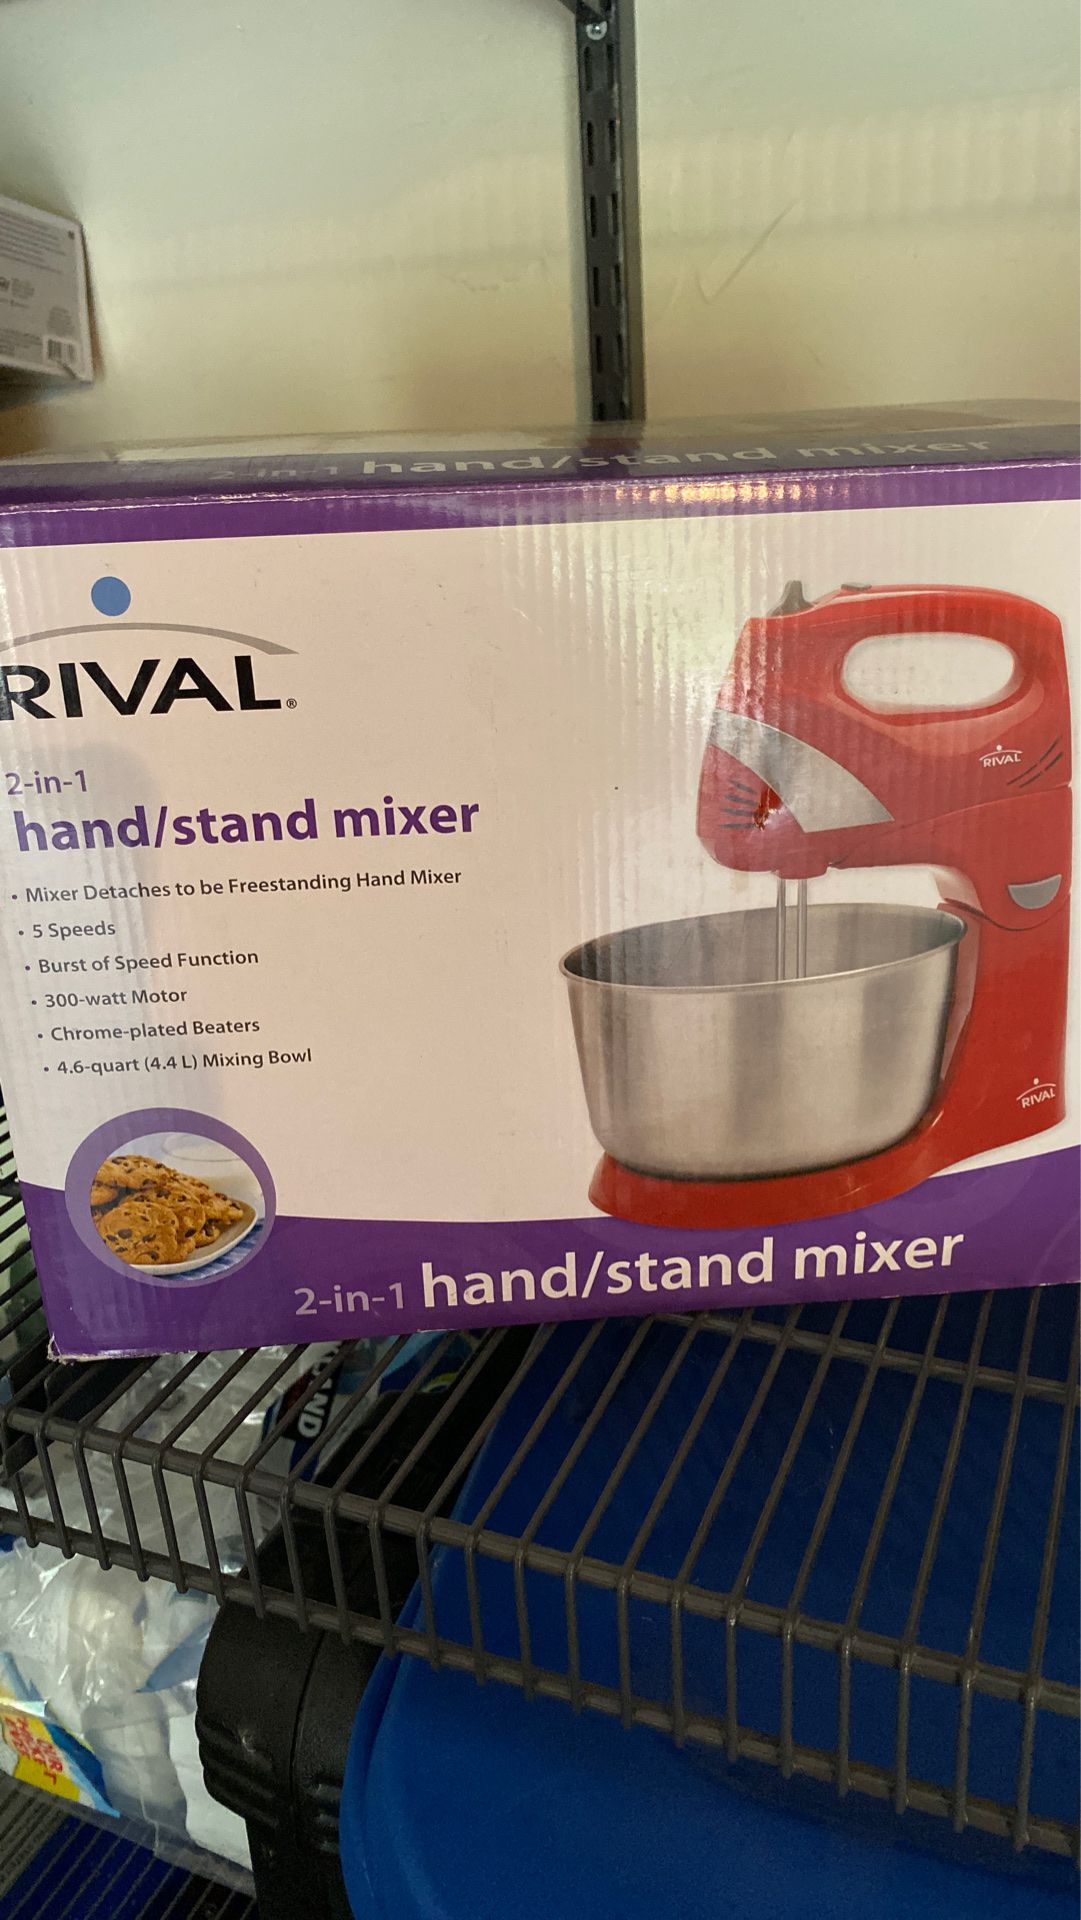 Brand new rival hand stand mixer 2 in 1.